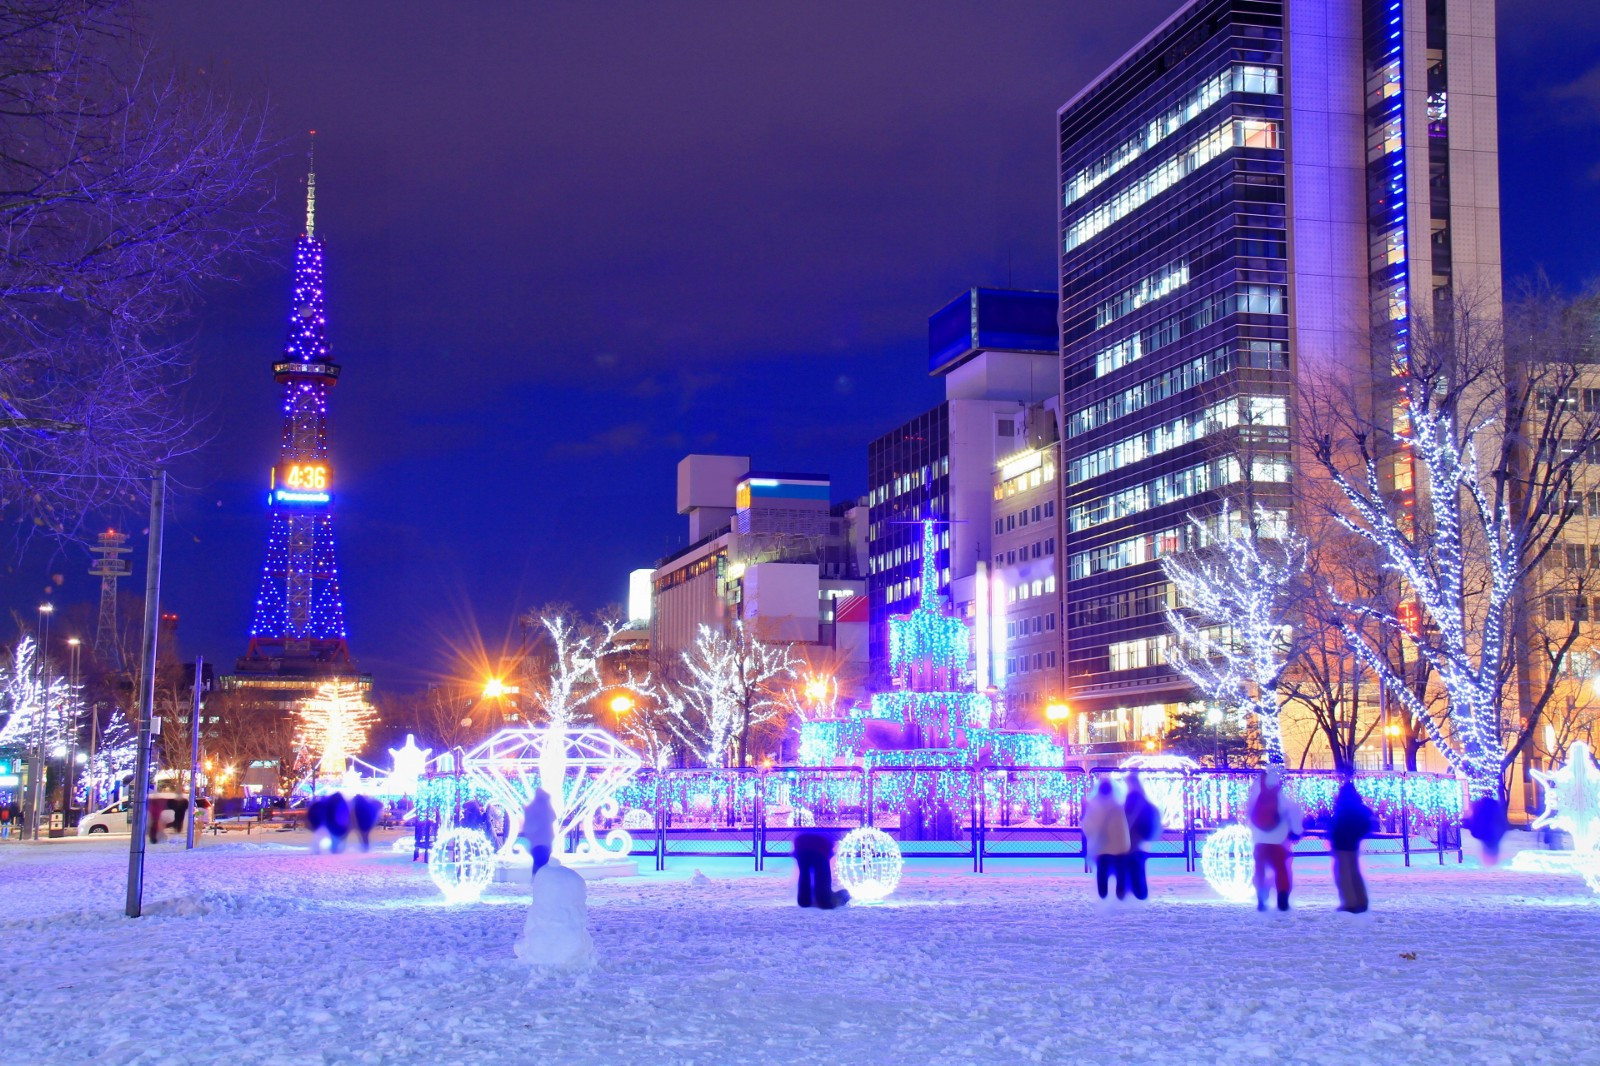 Sapporo will hold a mayoral election which will determine the fate of its 2030 bid ©Getty Images